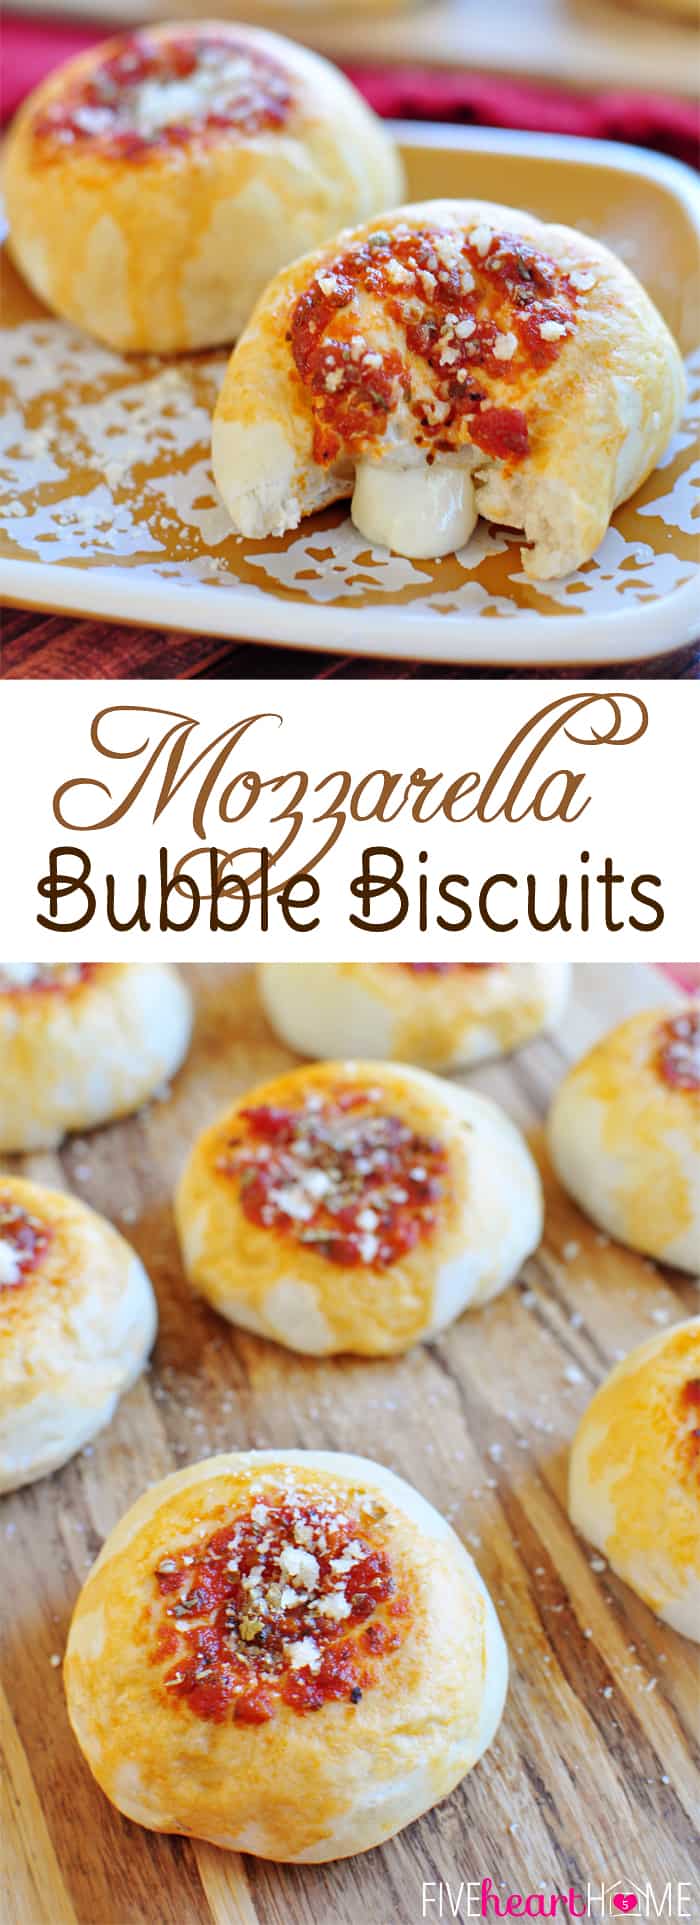 Mozzarella Bubble Biscuits ~ refrigerated biscuits with gooey, cheesy centers and marinara on top | FiveHeartHome.com